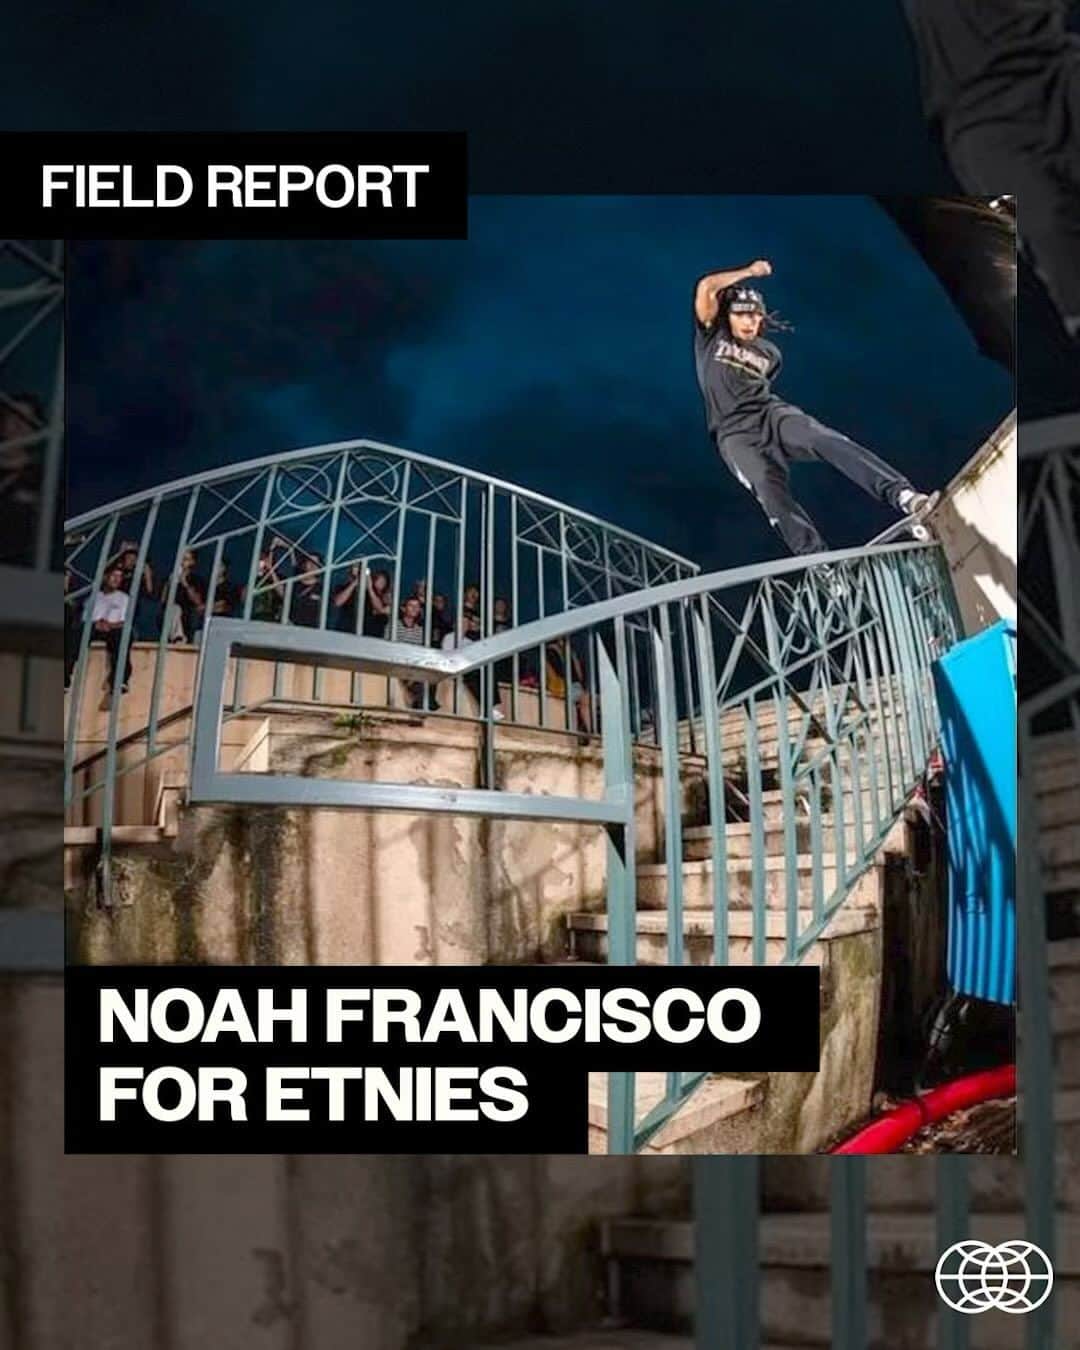 The Berricsのインスタグラム：「Field Report:   @noahsk8francisco, the 17-year-old ripper reigning from Paris, has been putting in work for @etniesskateboarding 💪 From handling hectic handrails, taking on massive stair sets with an absolutely magnetic heelflip, and the ability to take high impact like it’s nothing, Francisco makes a splash in his latest clips for the brand.  Hit the link in bio to watch @noahsk8francisco ‘s Welcome to the @etniesskateboarding Team edit now showing on TheBerrics.com #skateboardingisfun #berrics   🎥: @kevinparrott jackthomspon @mat2pac @yennizz_yk」